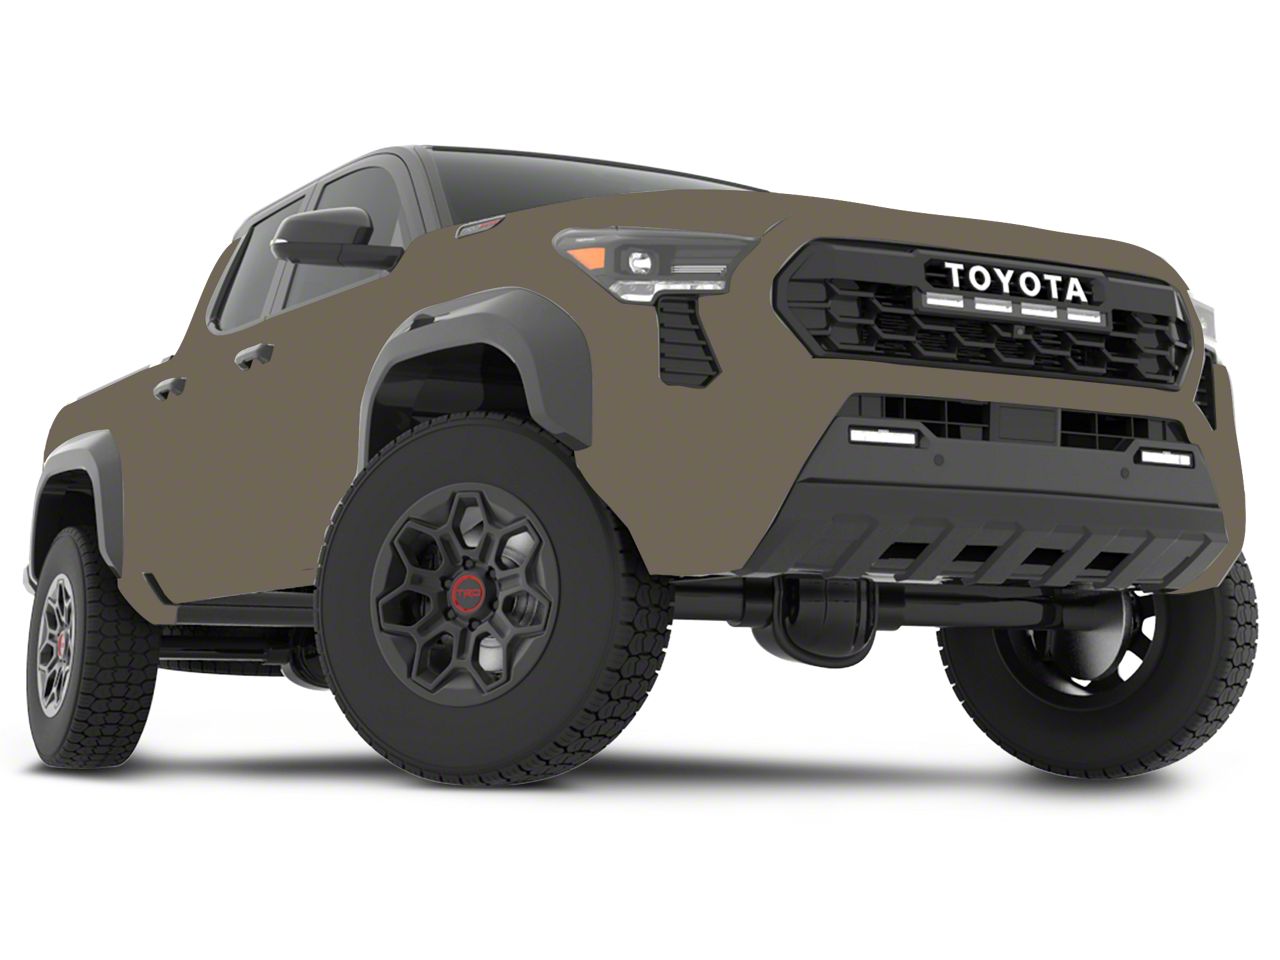 Toyota Wheels, Tires, & Packages ExtremeTerrain